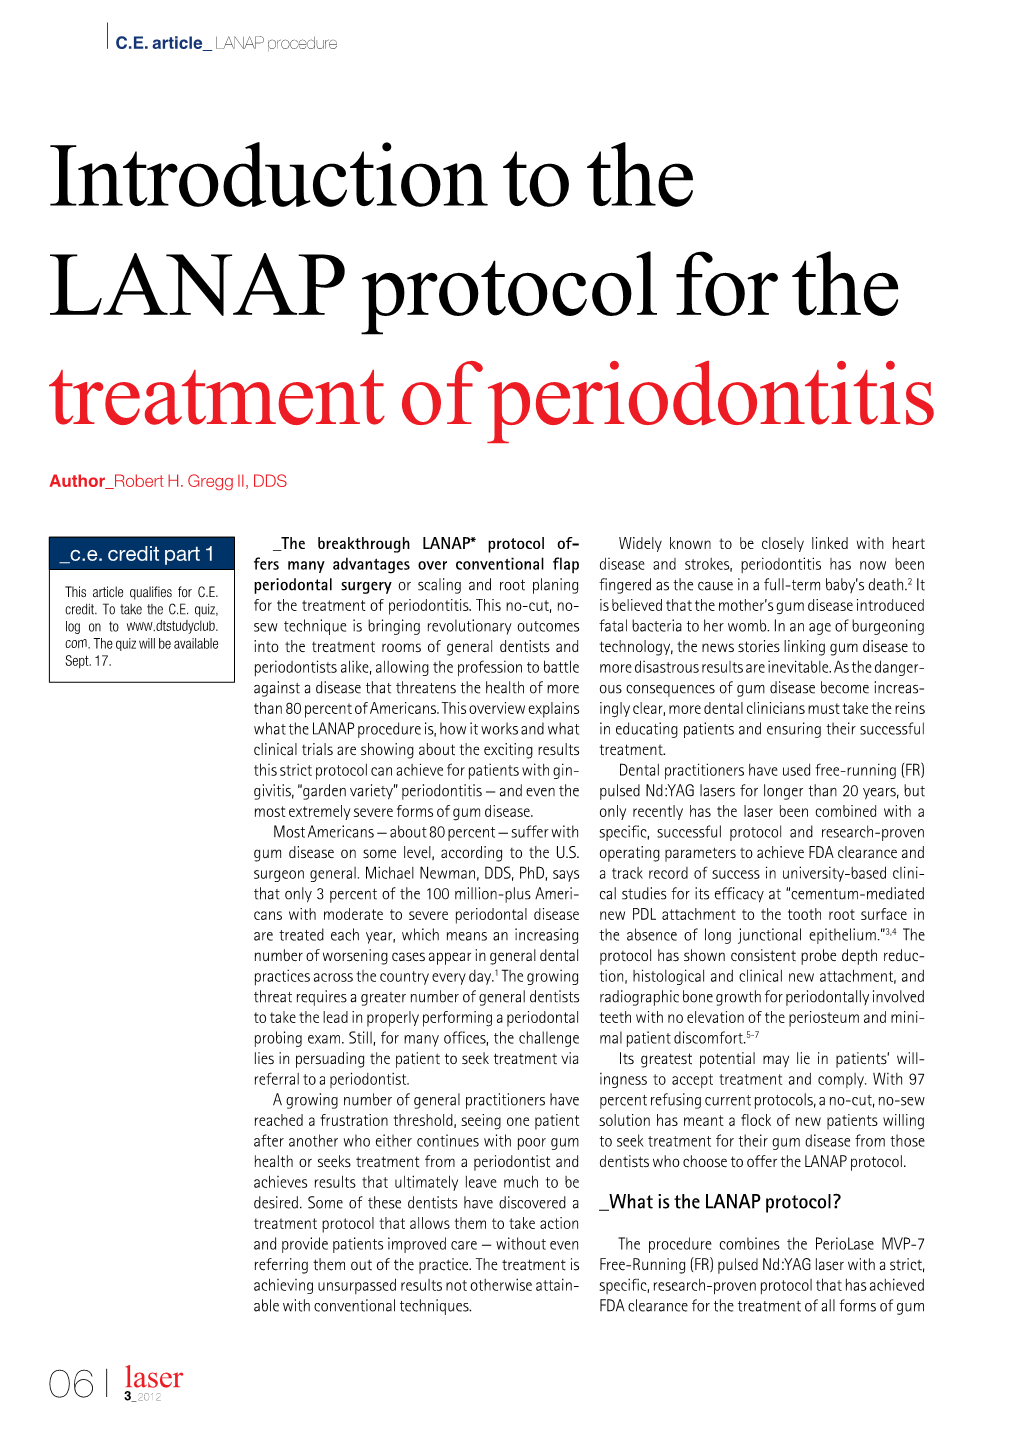 Introduction to the LANAP Protocol for the Treatment of Periodontitis